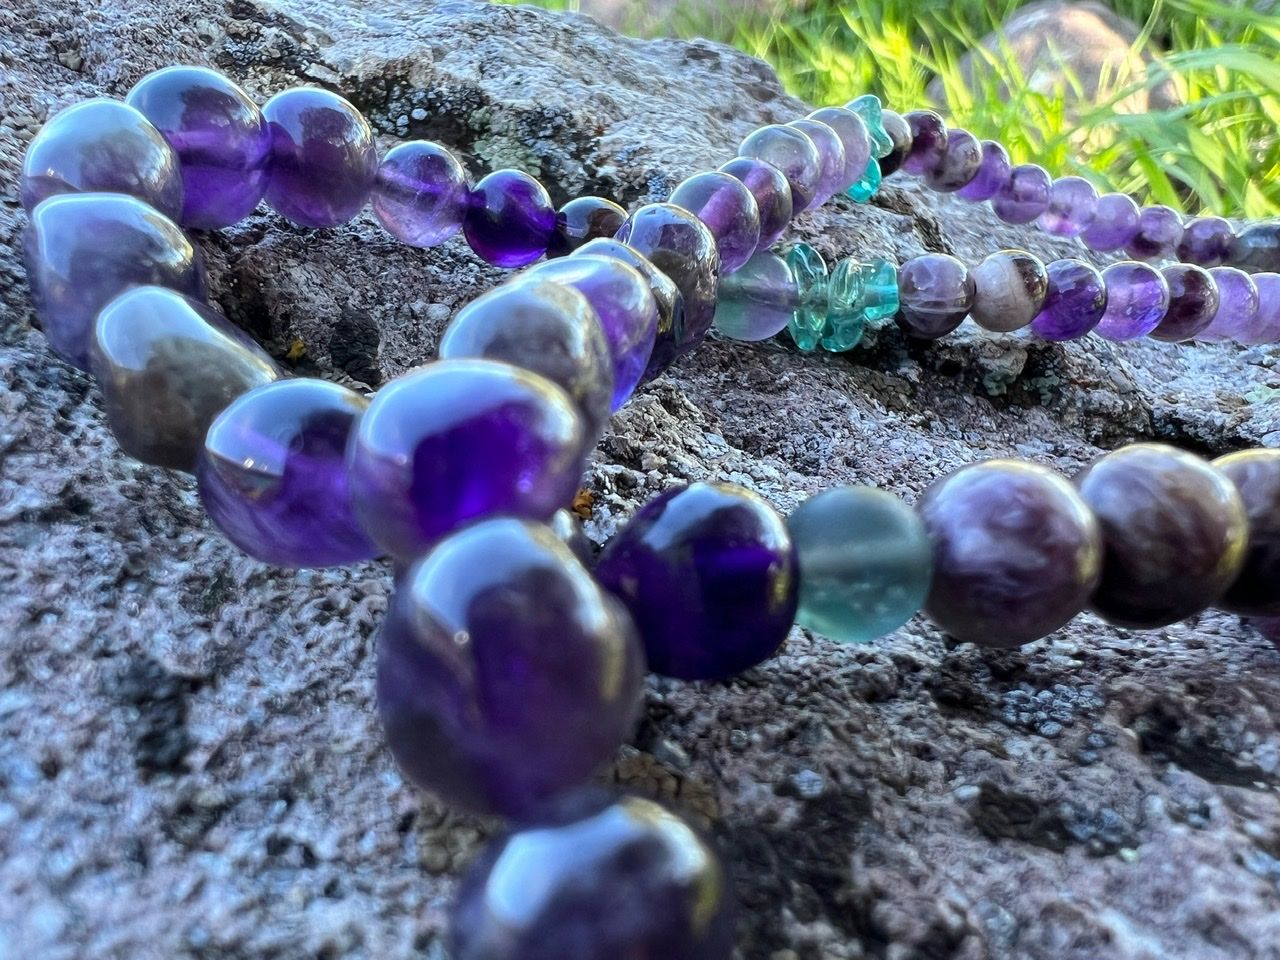 A necklace of purple, green and grey stones and crystals rests on a lichen covered Boulder 